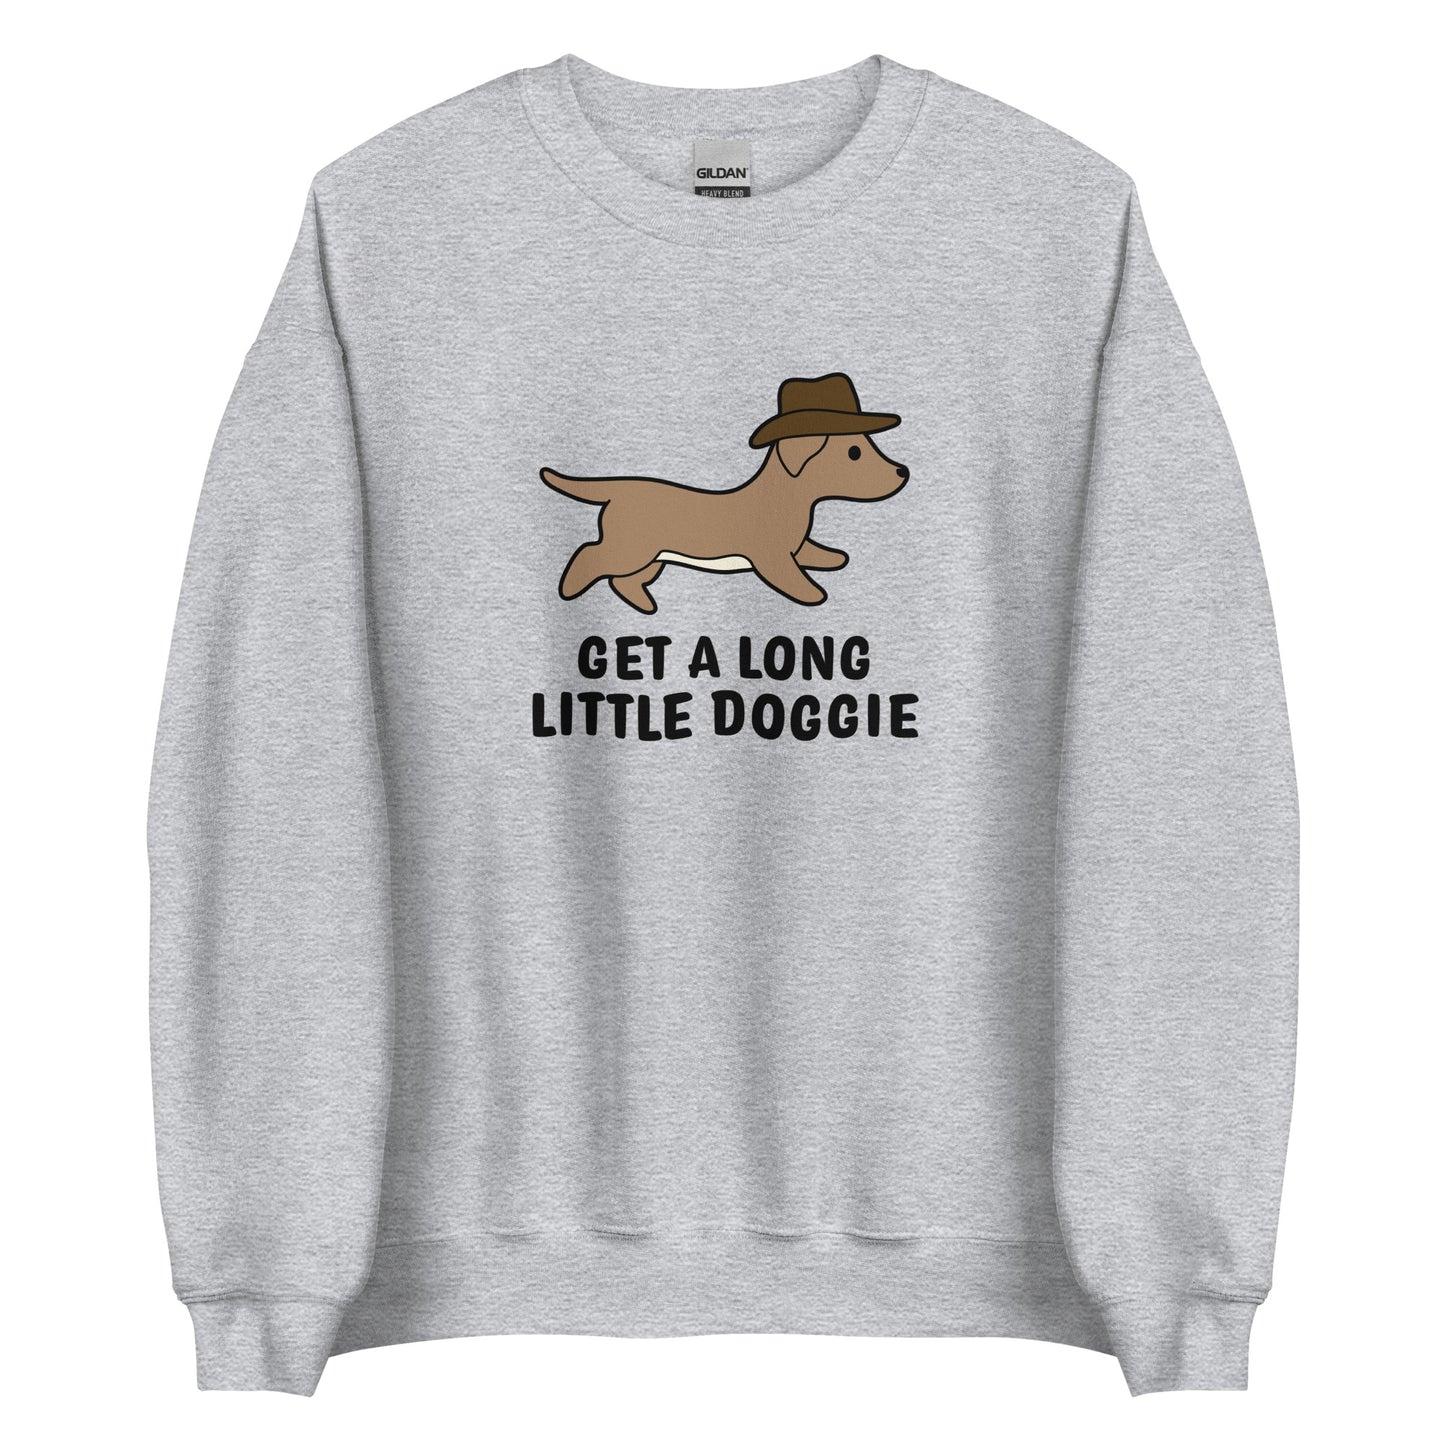 A gray crewneck sweatshirt featuring an image of a dachshund wearing a cowboy hat. Text below the dog reads "Get a long little doggie"